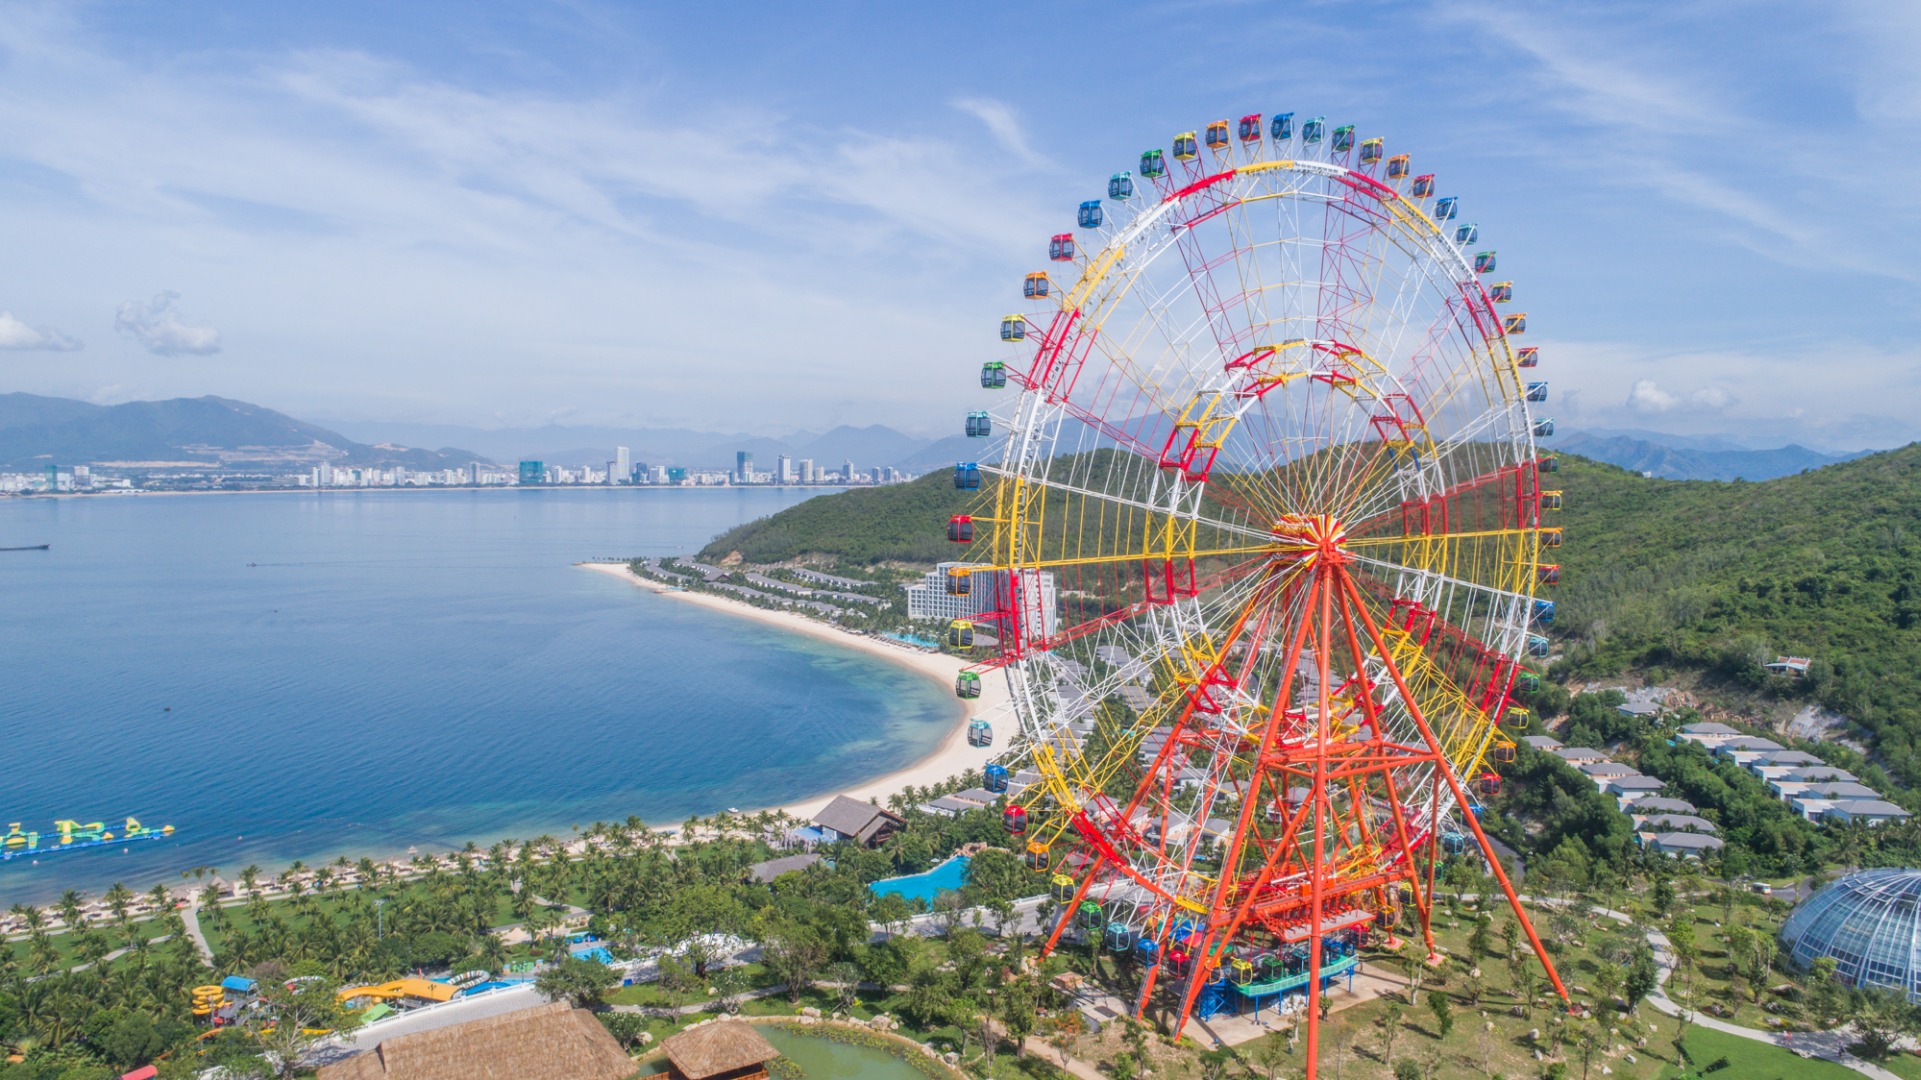 A photo of the Vinpearl Land amusement park on an island off the coast of Nha Trang.